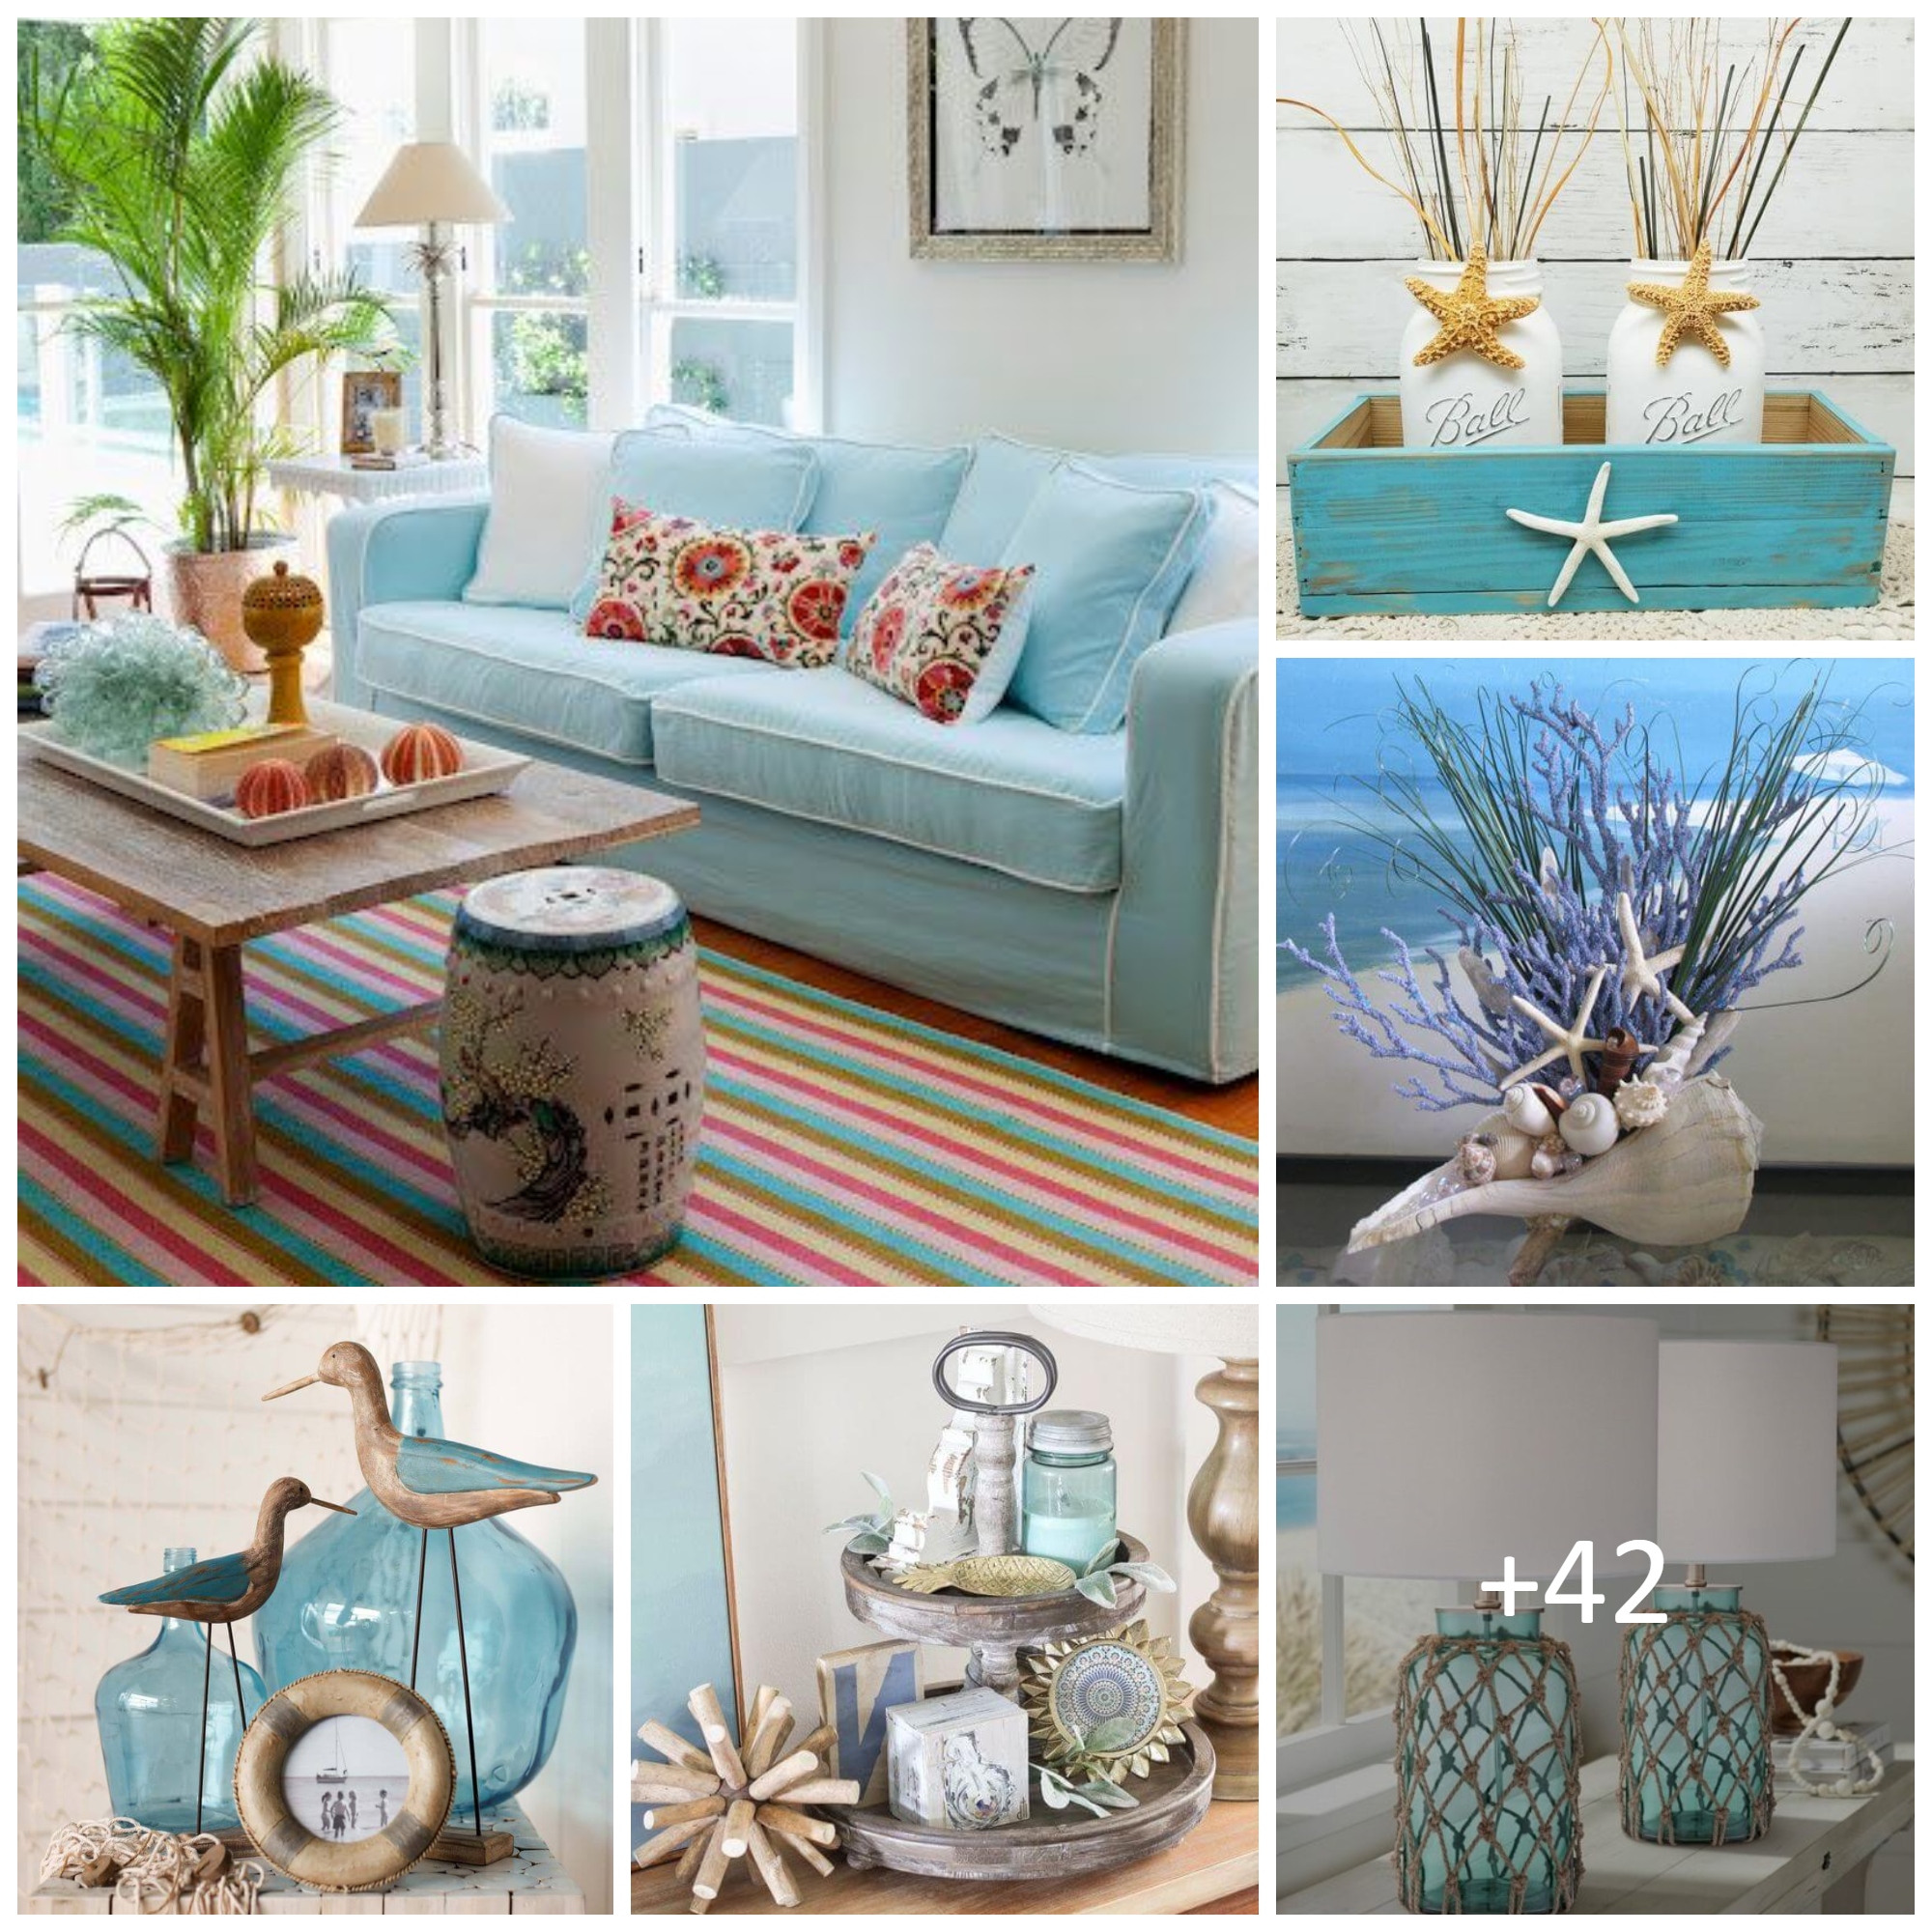 Modern Coastal Decorating Ideas for Your Home